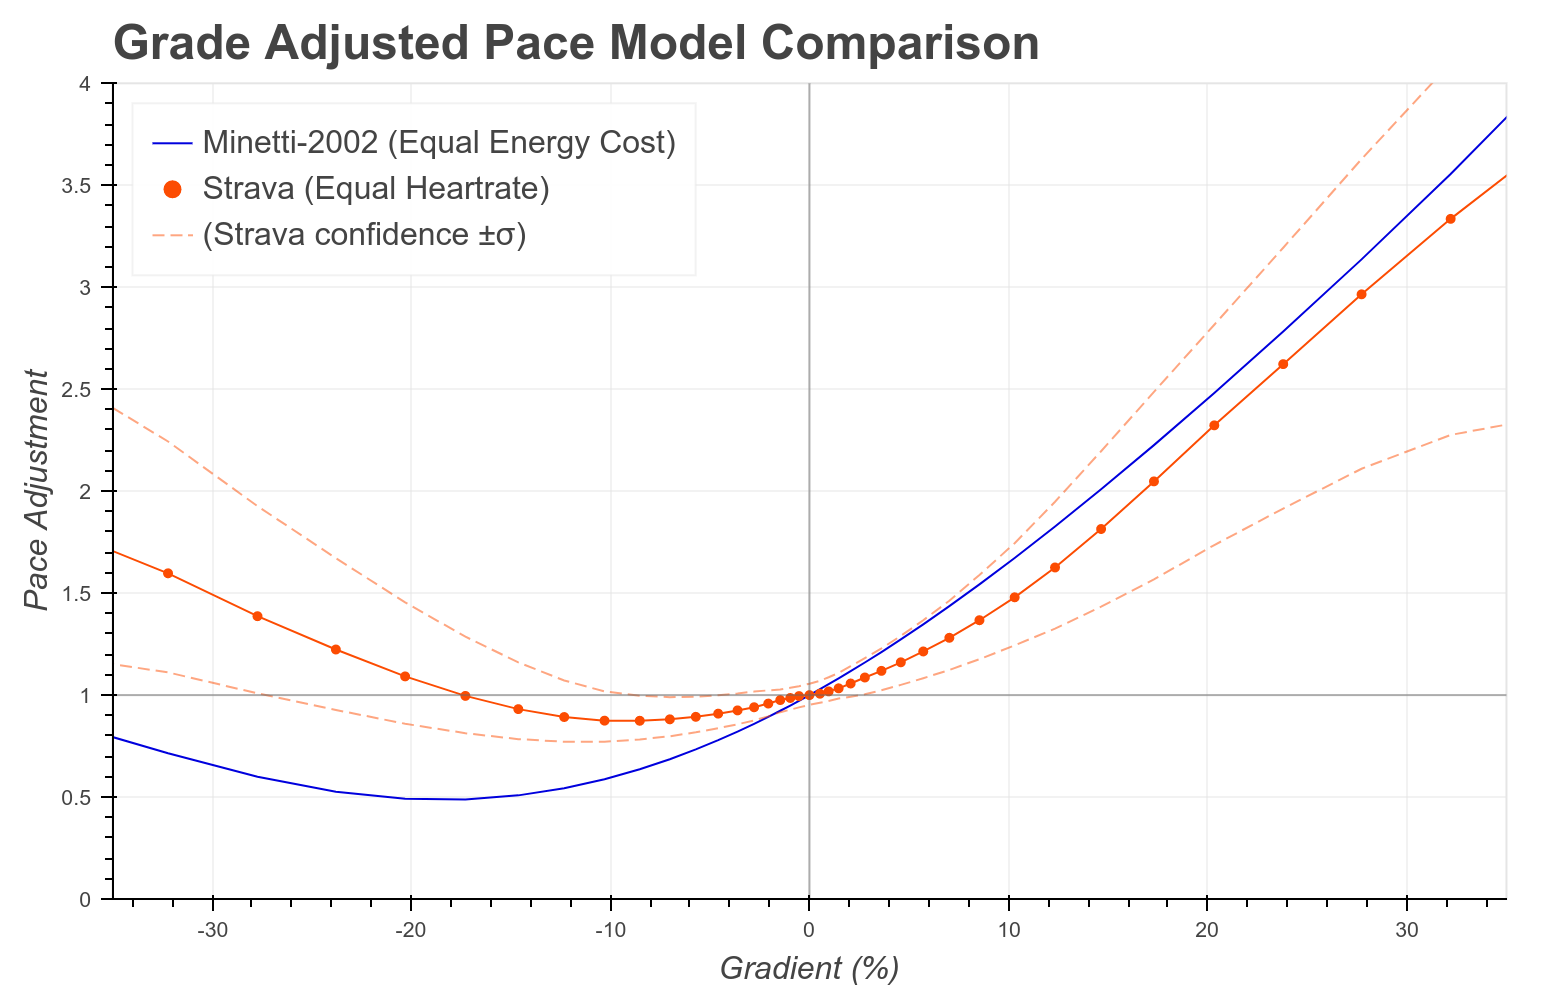 Grade-adjusted pace